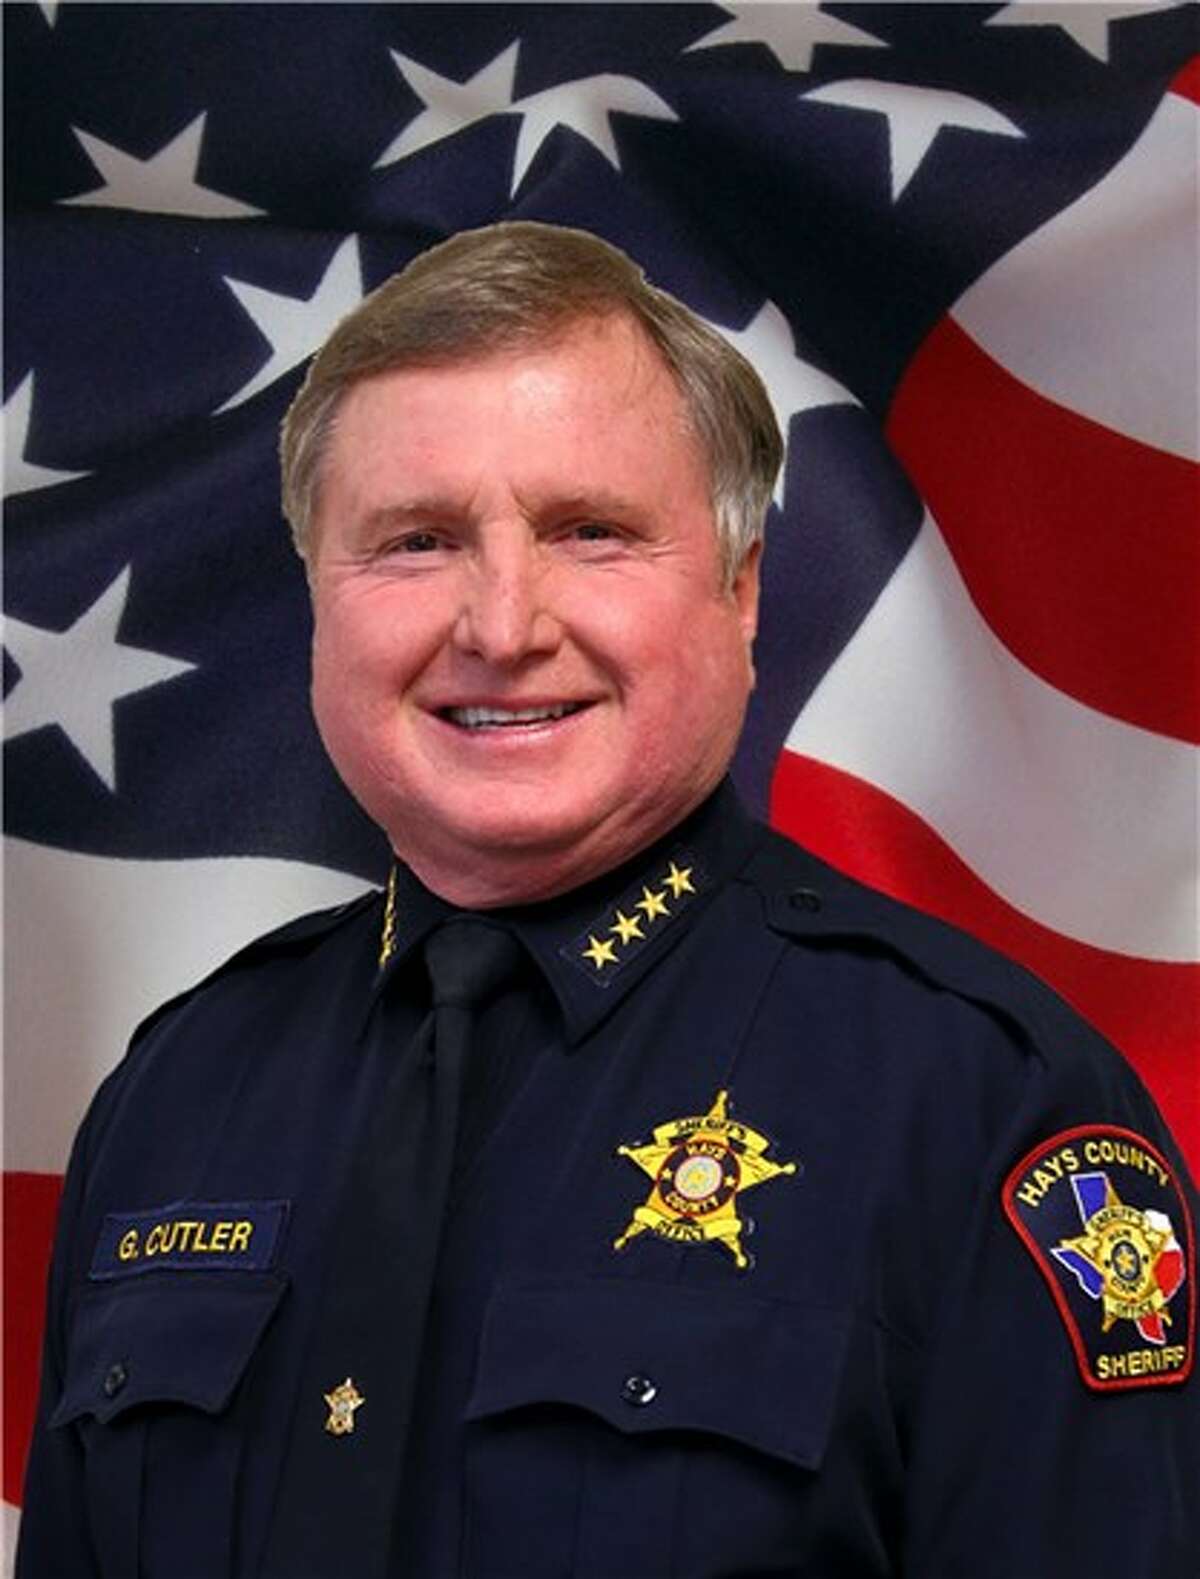 Hays County Sheriff Gary Cutler boarded a flight to Europe for a one-week vacation on May 23, hours before record floods hit the area, the Hays County Sheriff's Office confirmed Monday. Cutler returned May 30, but critics blasted him for not returning to the storm-ravaged county more quickly.